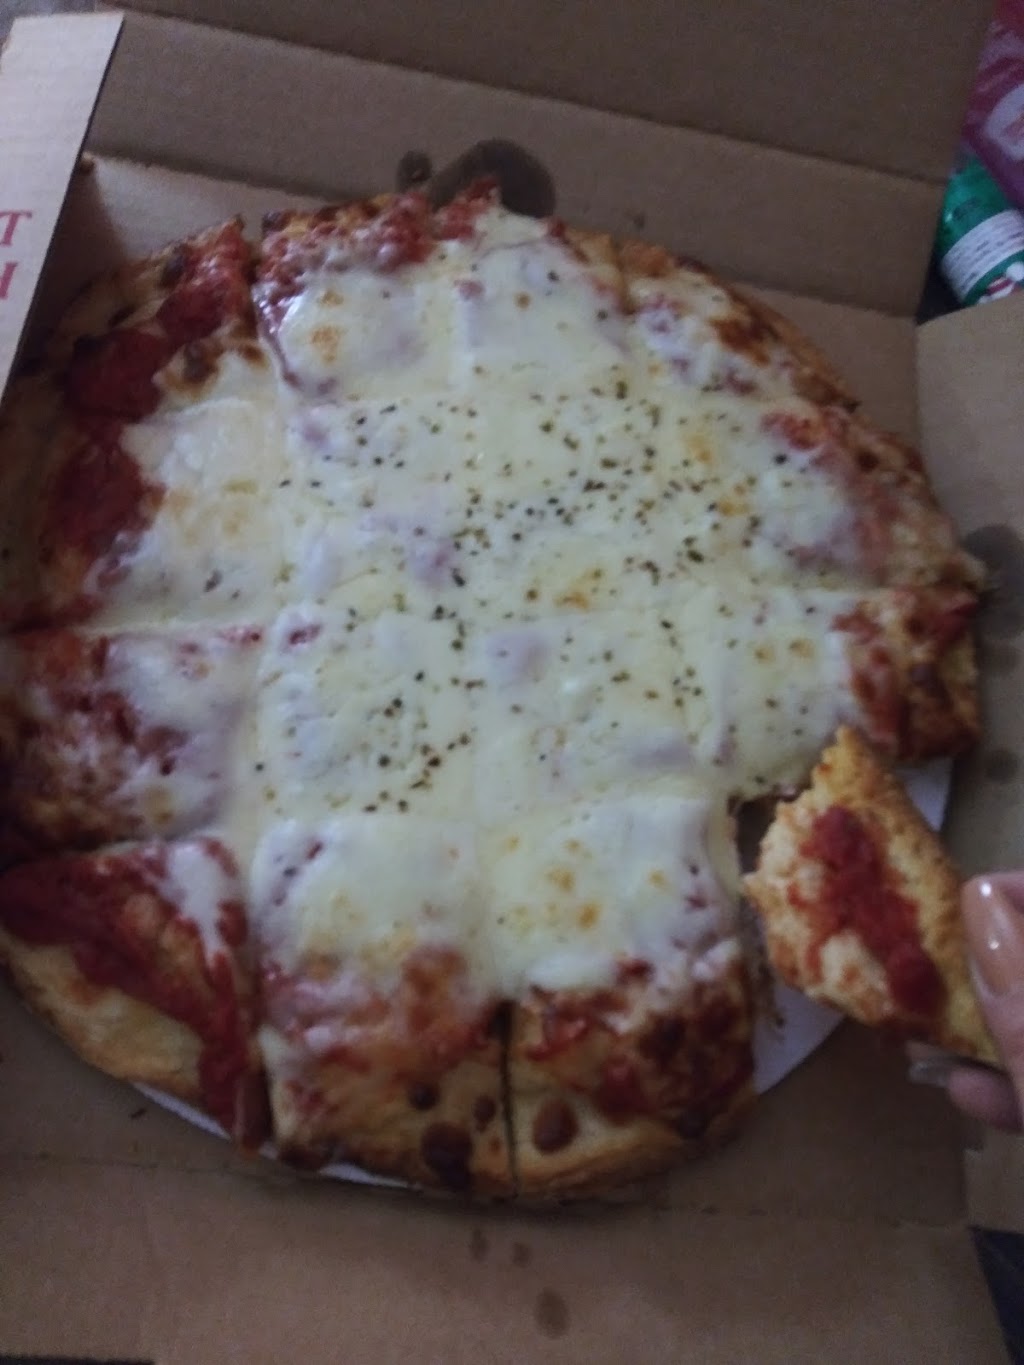 Barracos Pizza | meal delivery | 5740 W 87th St, Burbank, IL 60459, USA | 7086369594 OR +1 708-636-9594